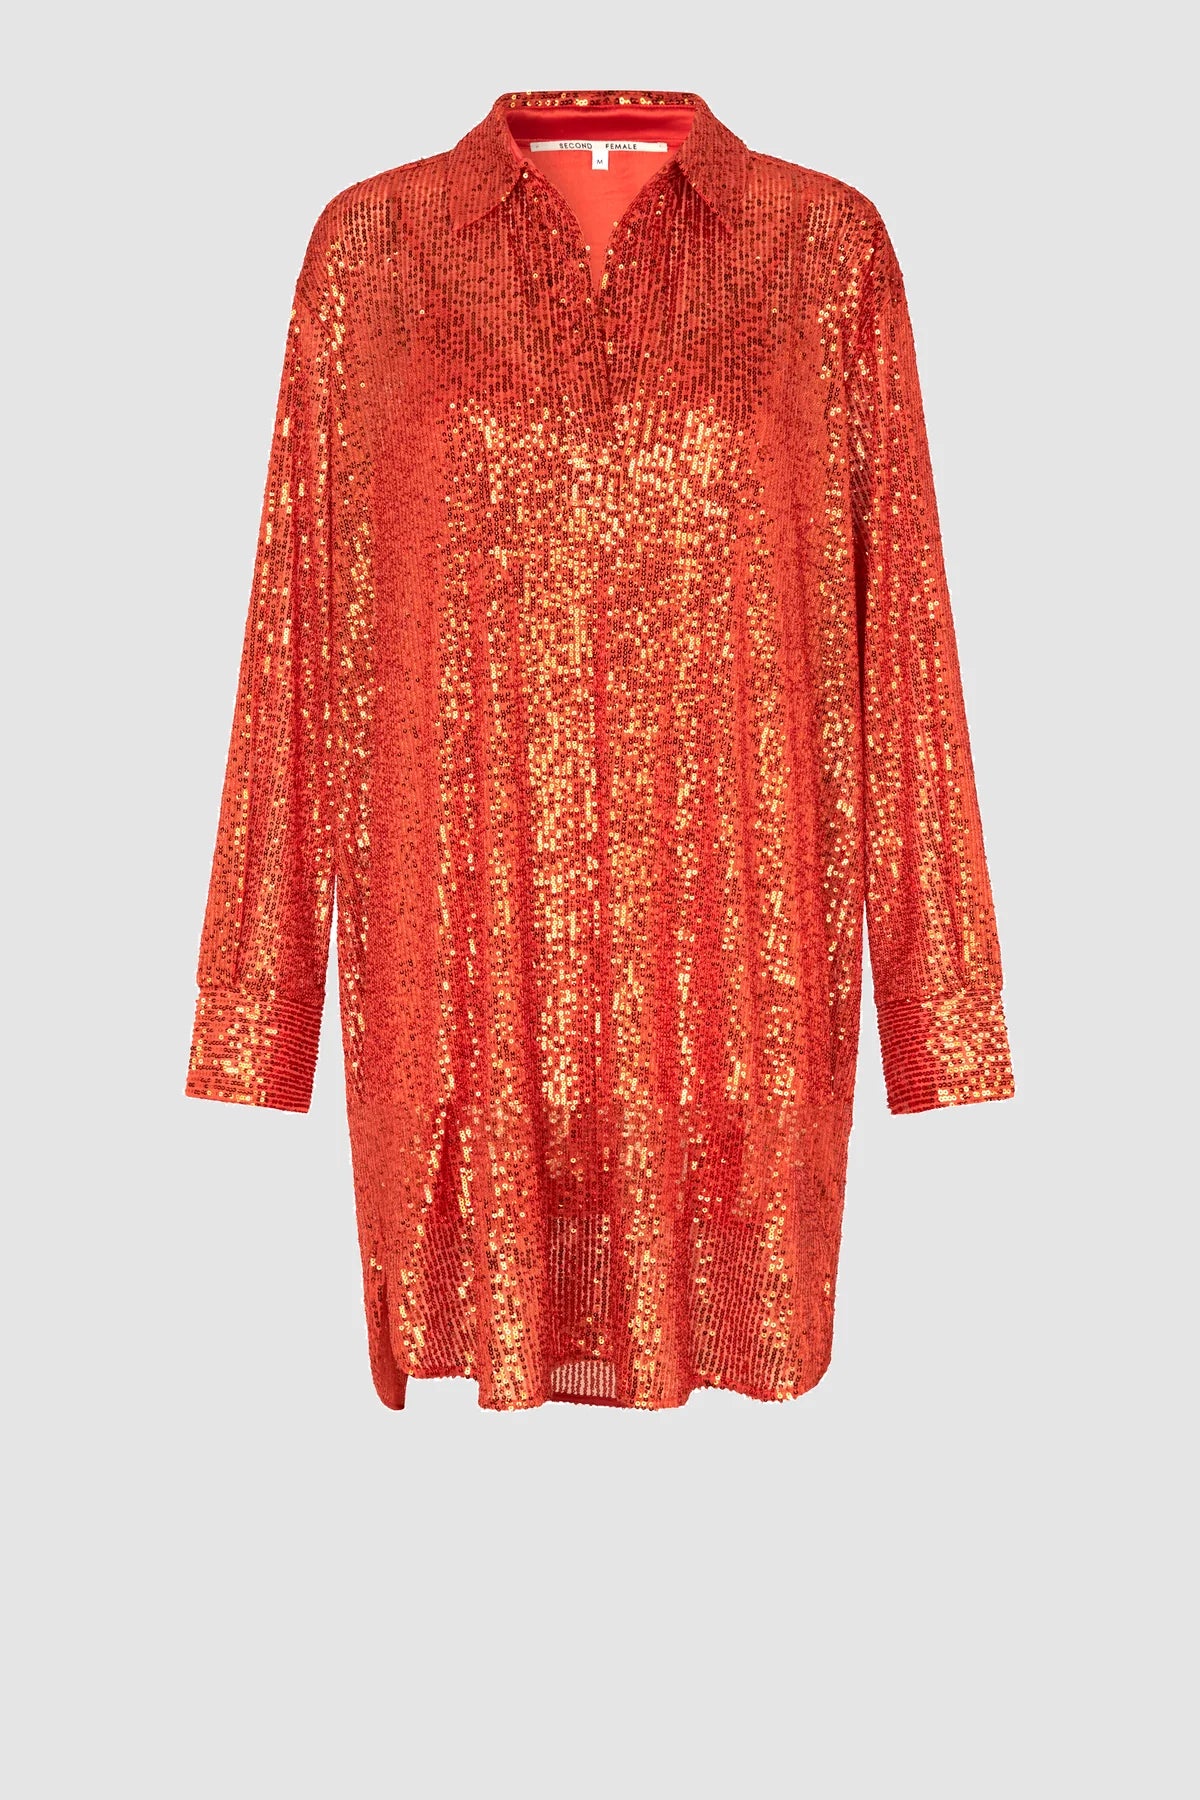 Burnt orange sequin tunic with long sleeves half placket classic collar and dropped curved hem